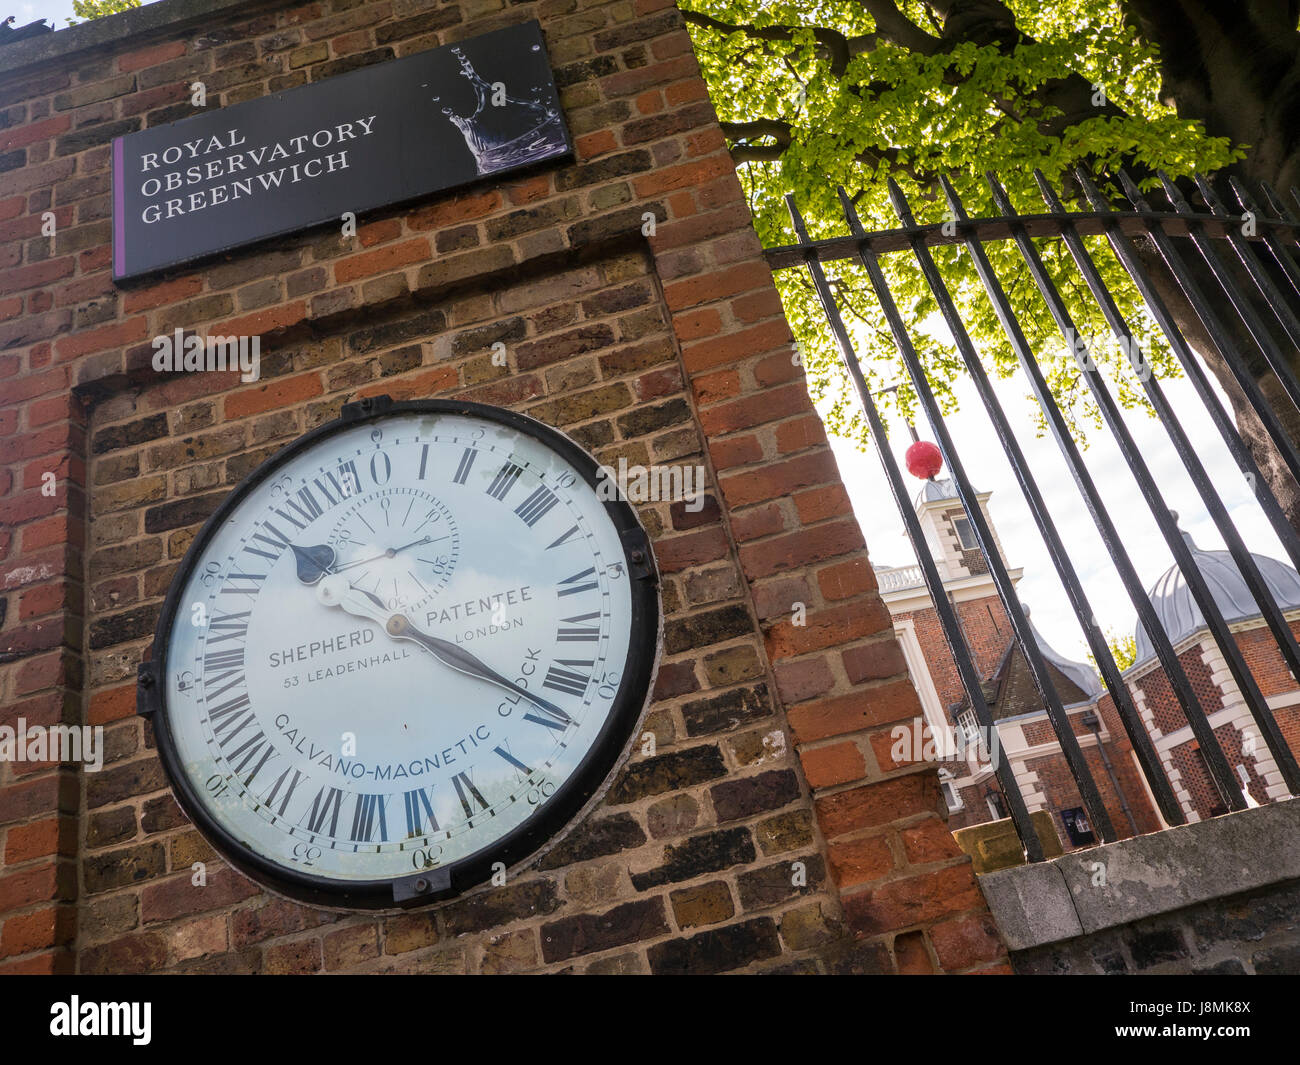 The Shepherd gate clock at the Royal Observatory in Greenwich, London, England, shows Greenwich Mean Time or GMT. Stock Photo